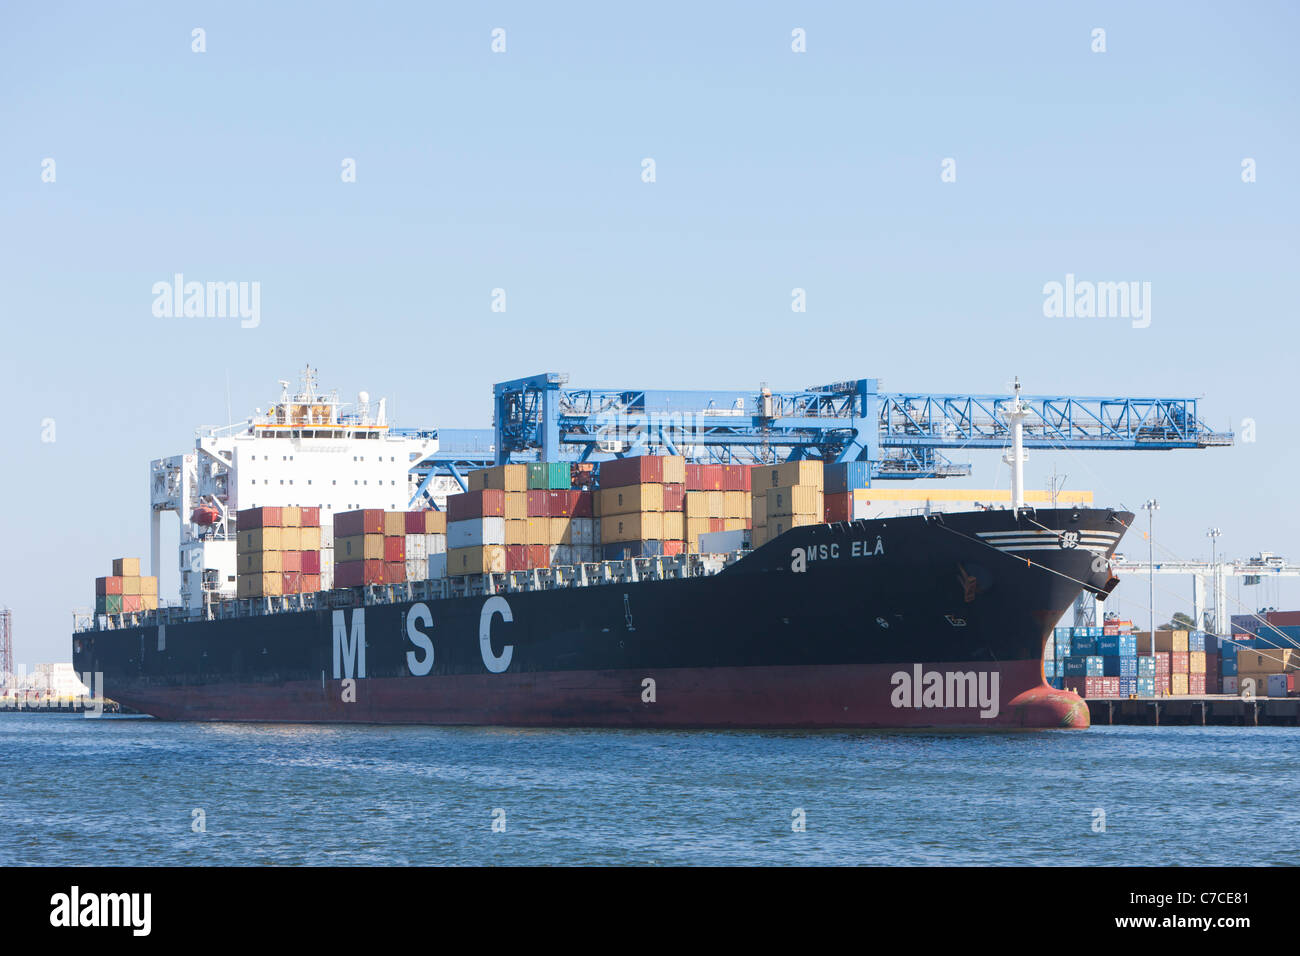 The MSC ELA container ship at the Paul W. Conley Terminal in Boston, Massachusetts. Stock Photo